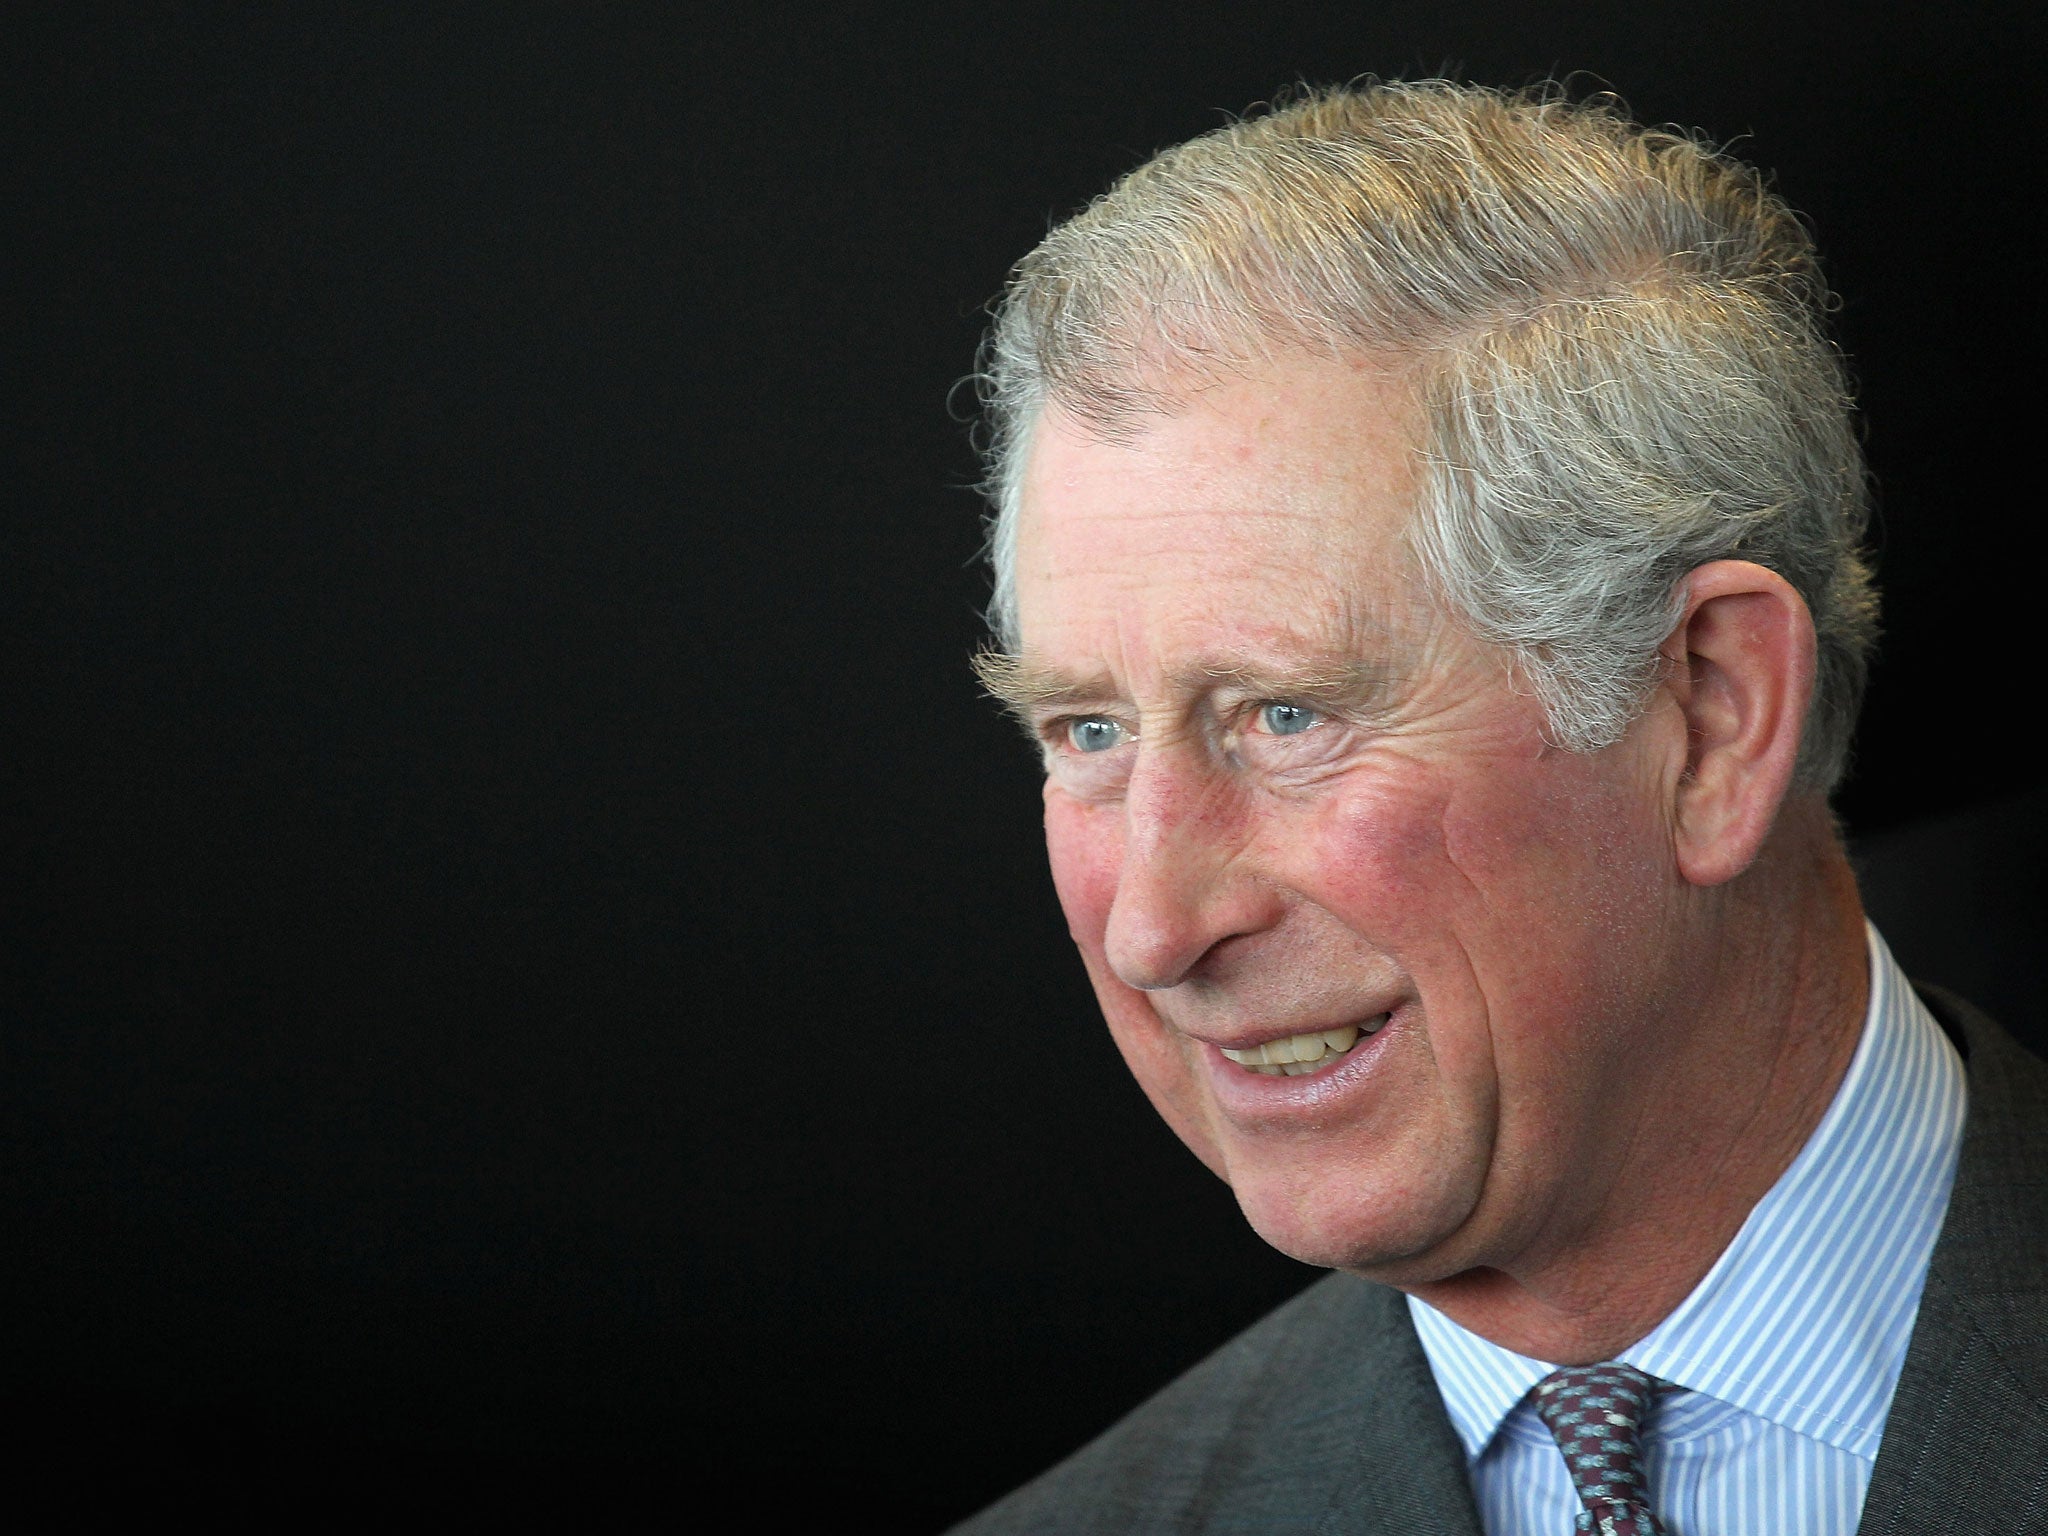 According to experts, Prince Charles may be a more outspoken and controversial monarch than his mother